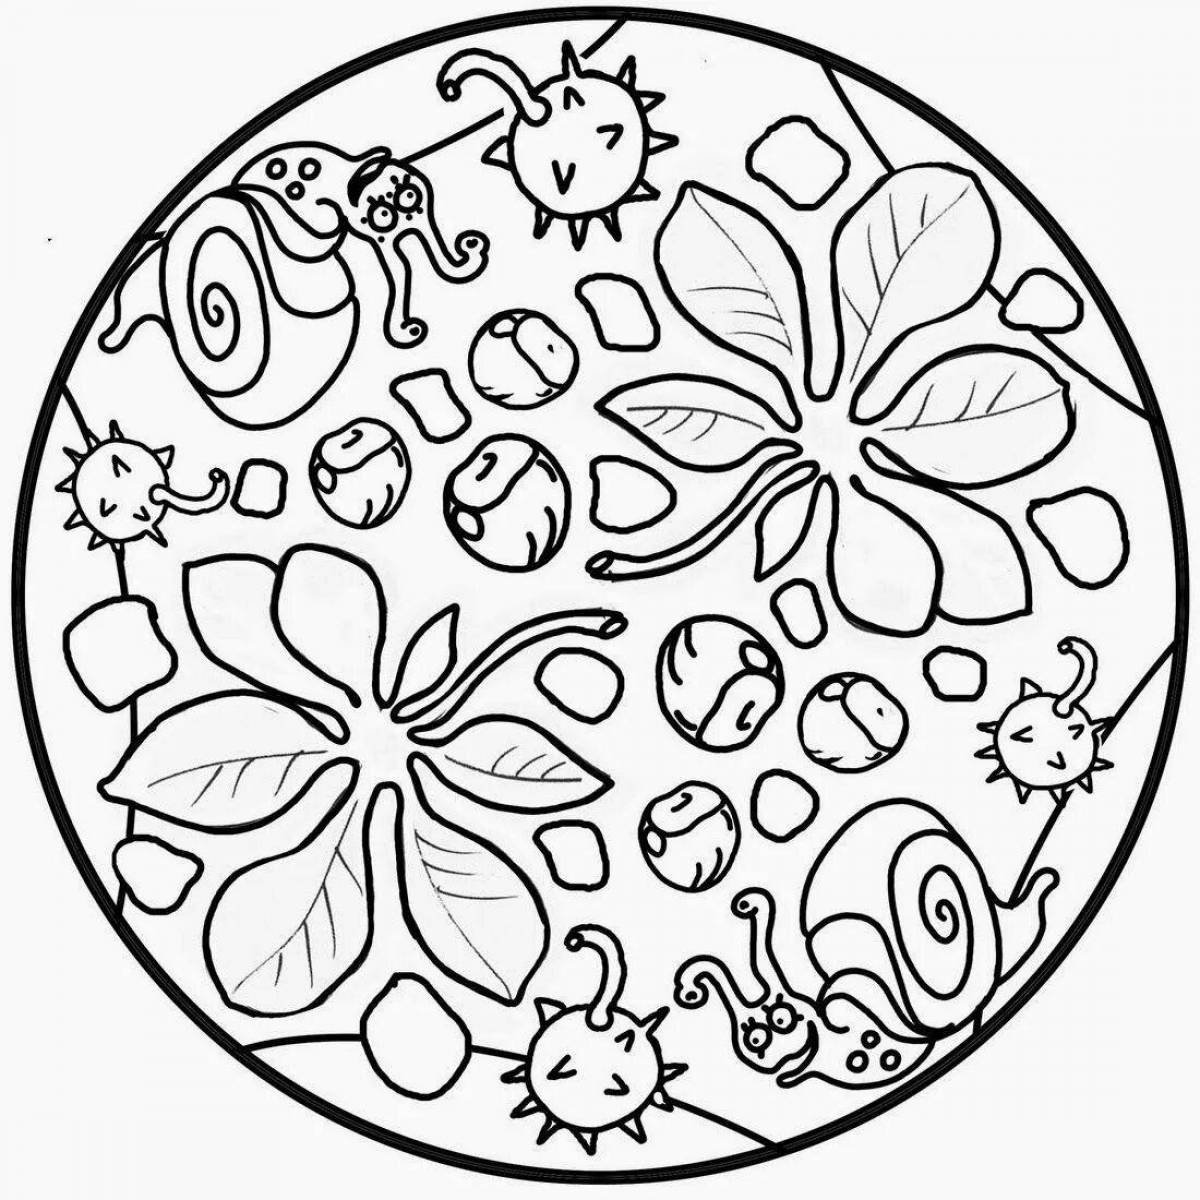 Colored mandala coloring pages for 5-6 year olds